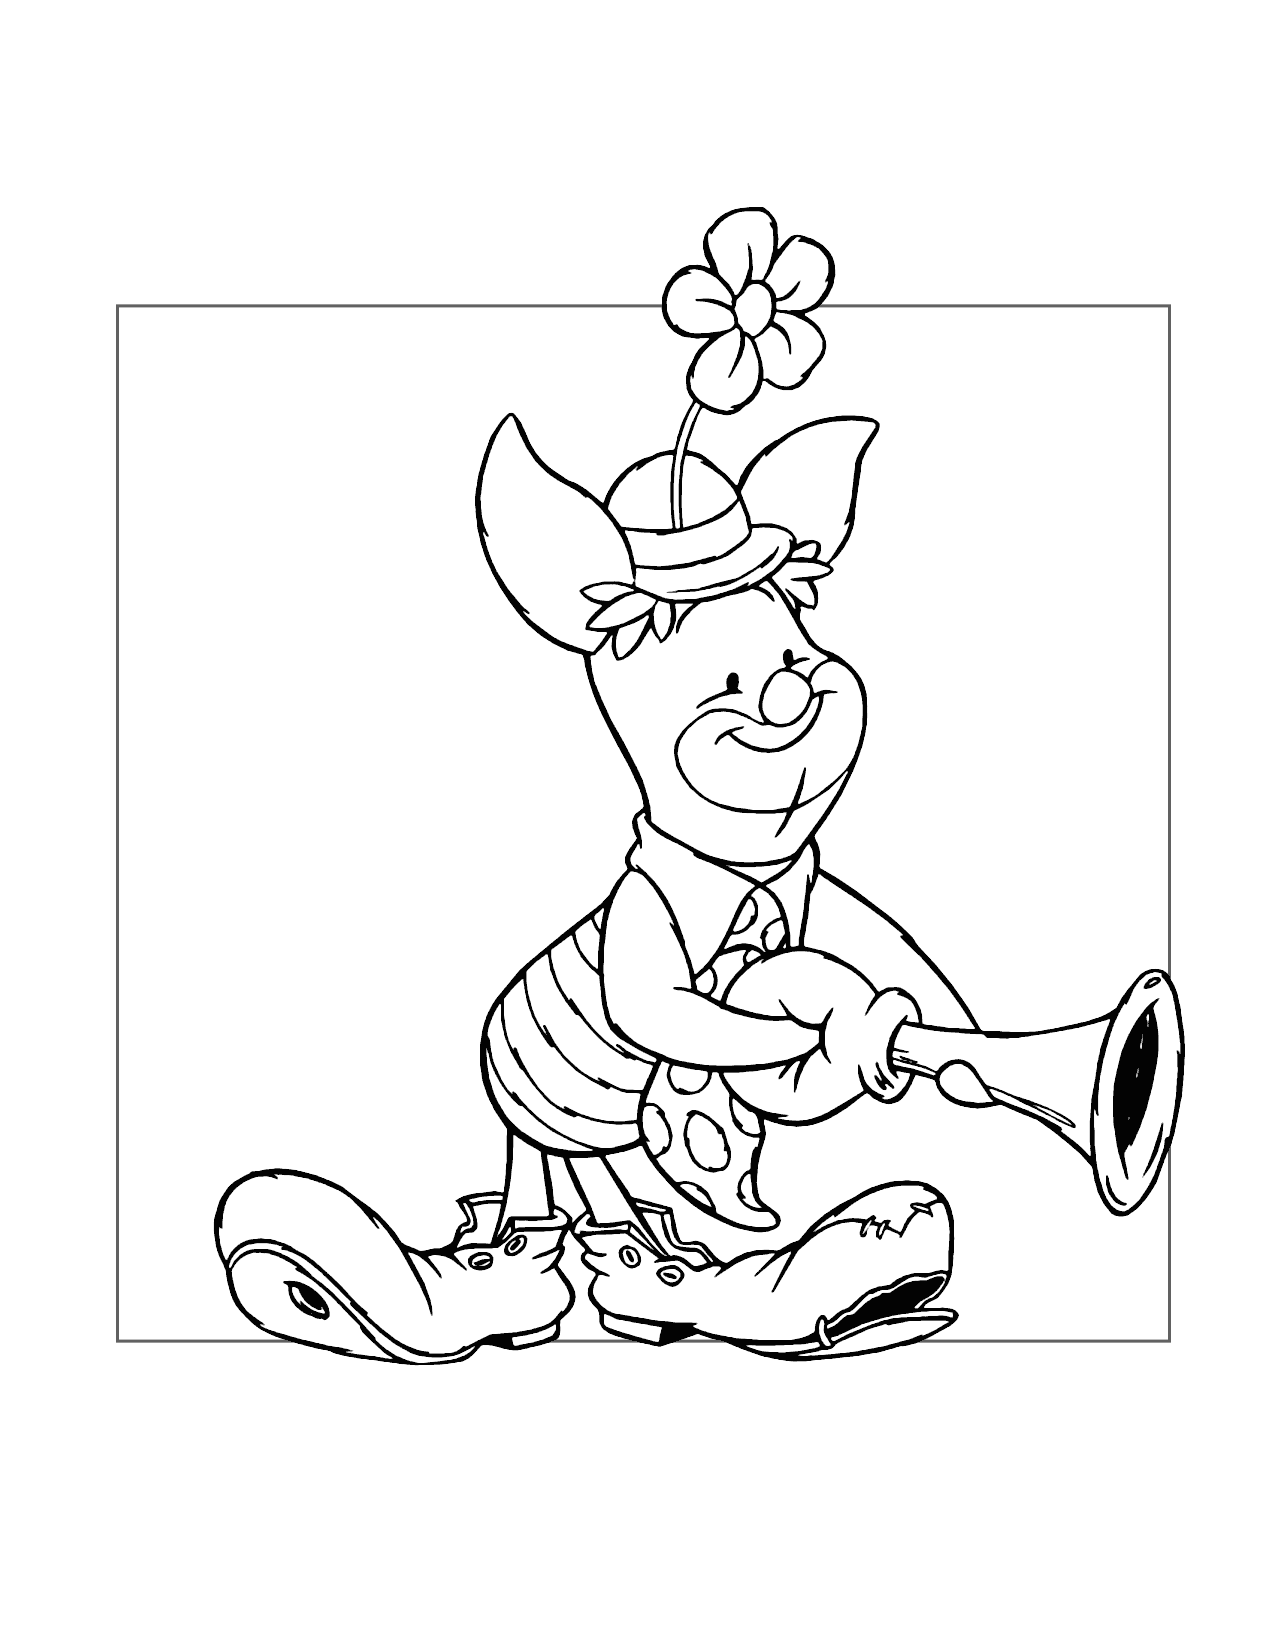 Clown Piglet Coloring Page